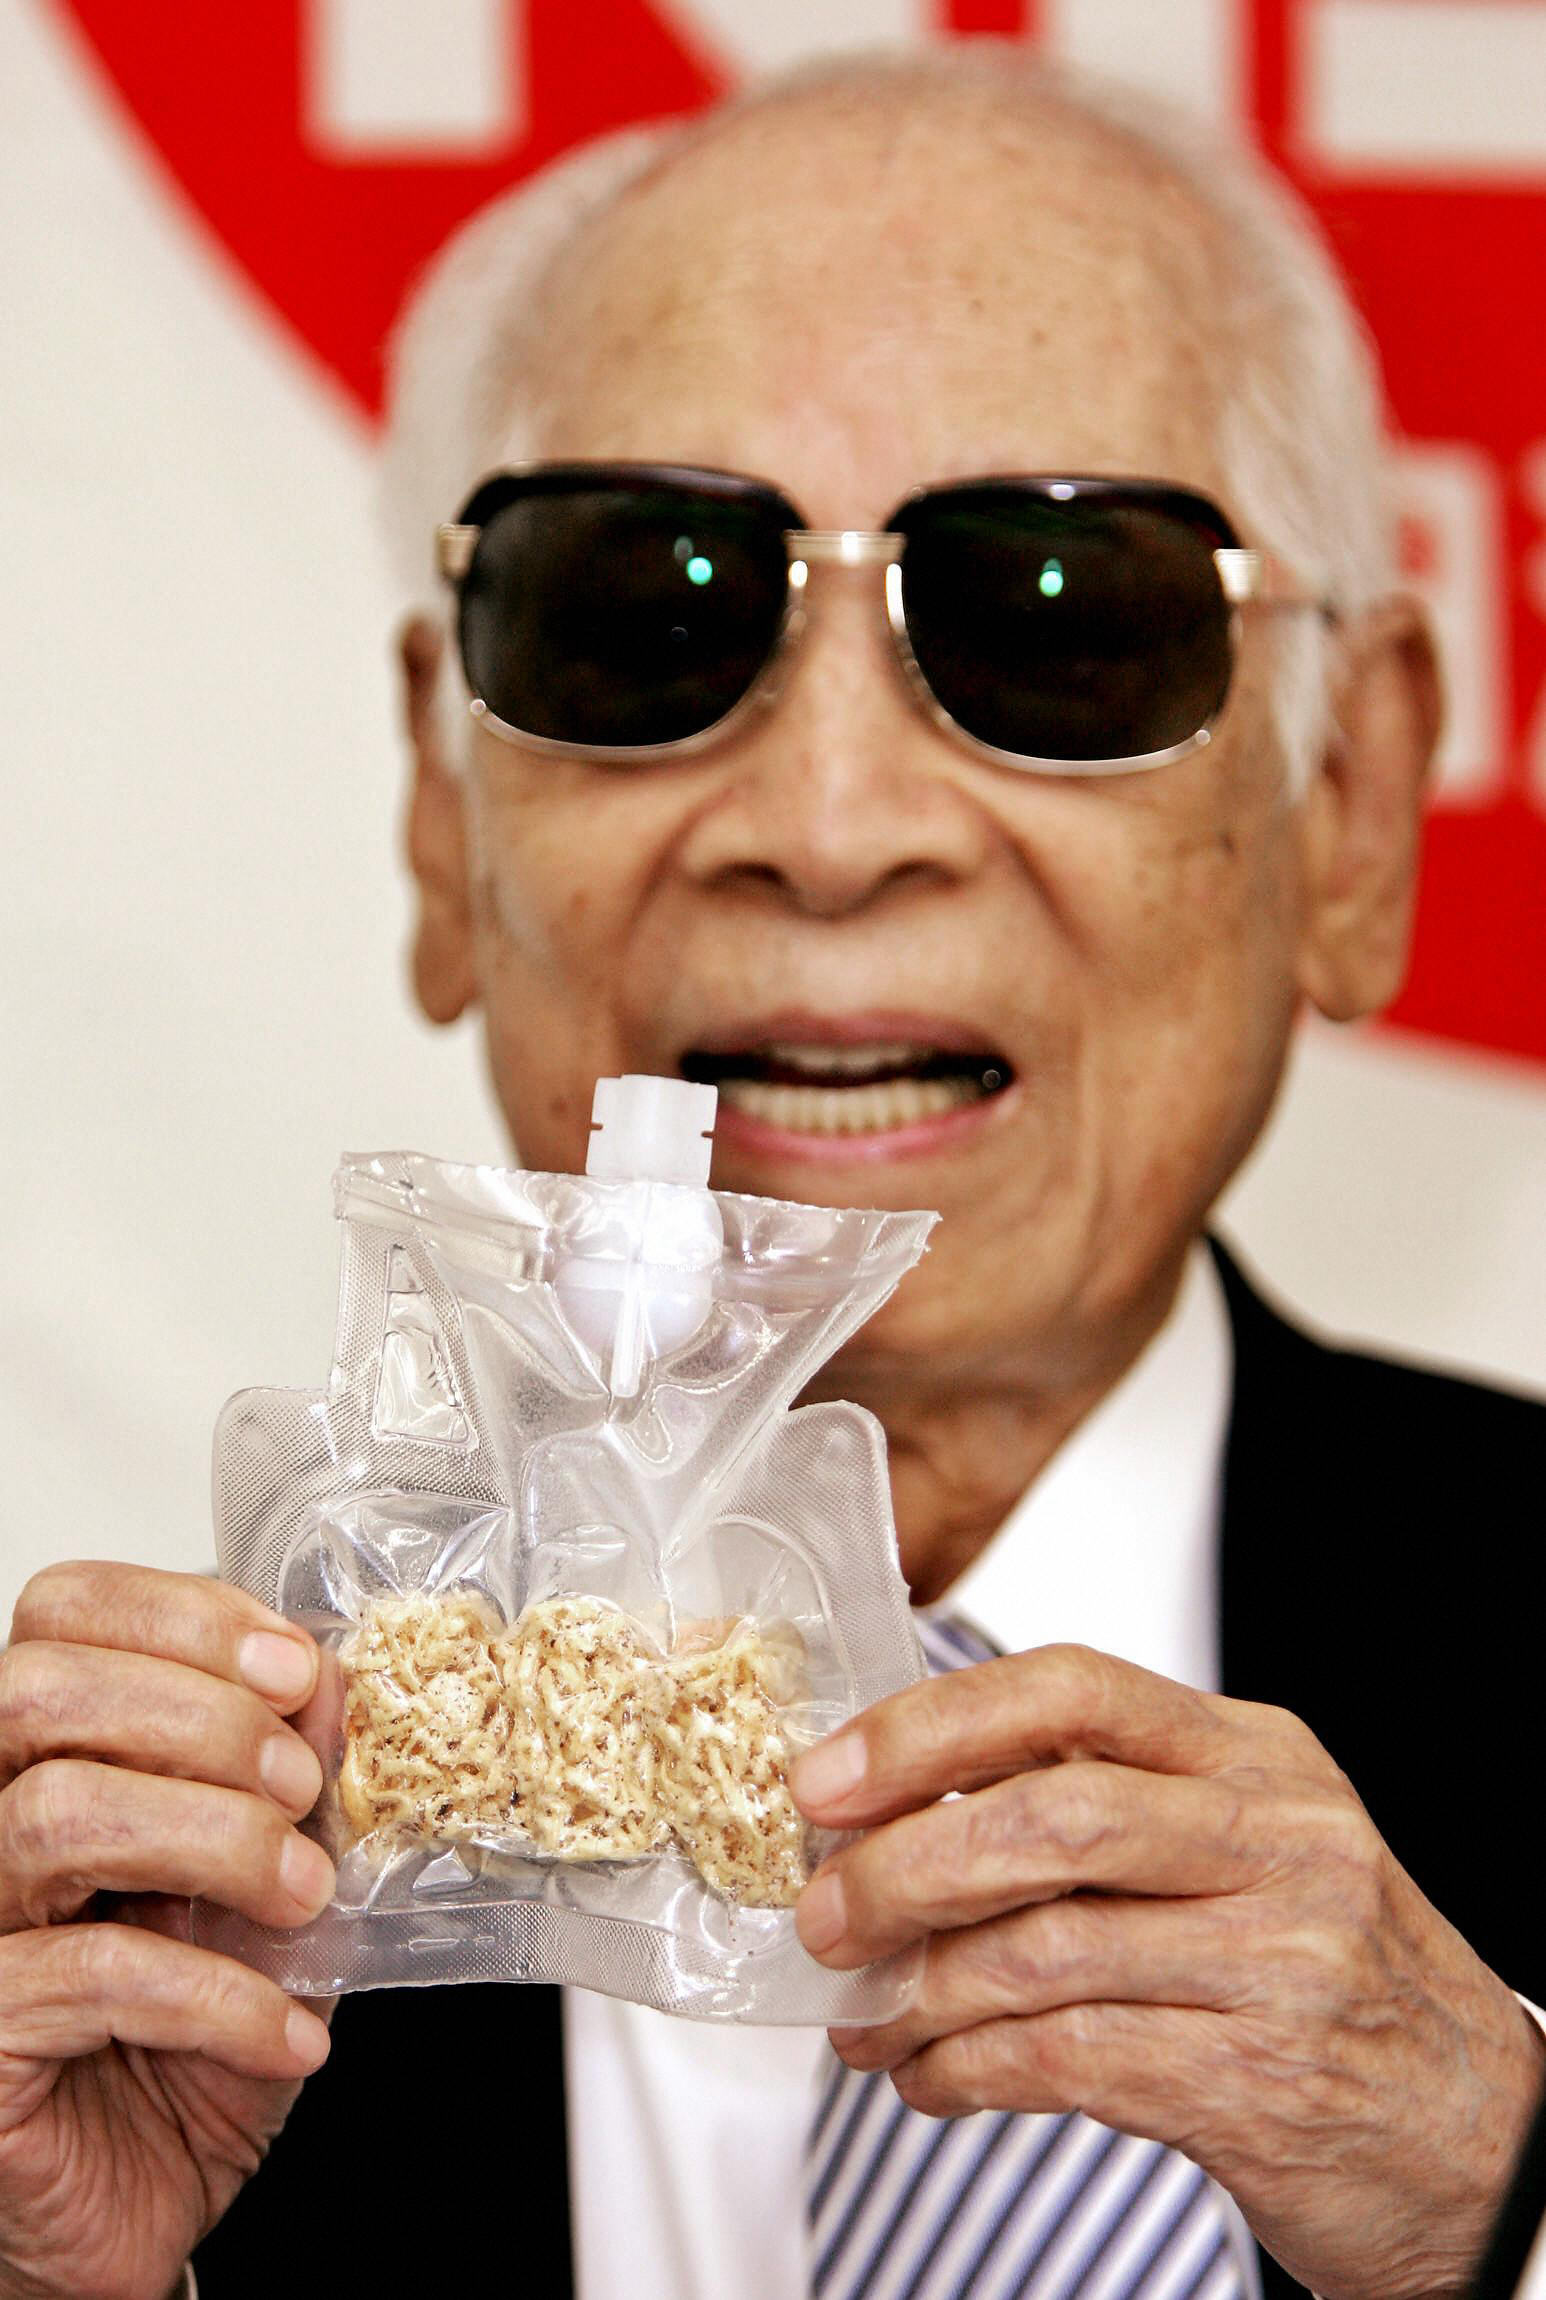 PHOTO: Momofuku Ando holds up a package of instant noodles for astronauts called "Space Ram" during a press conference at the company's Instant Noodle Museum in Osaka, July 27, 2005.